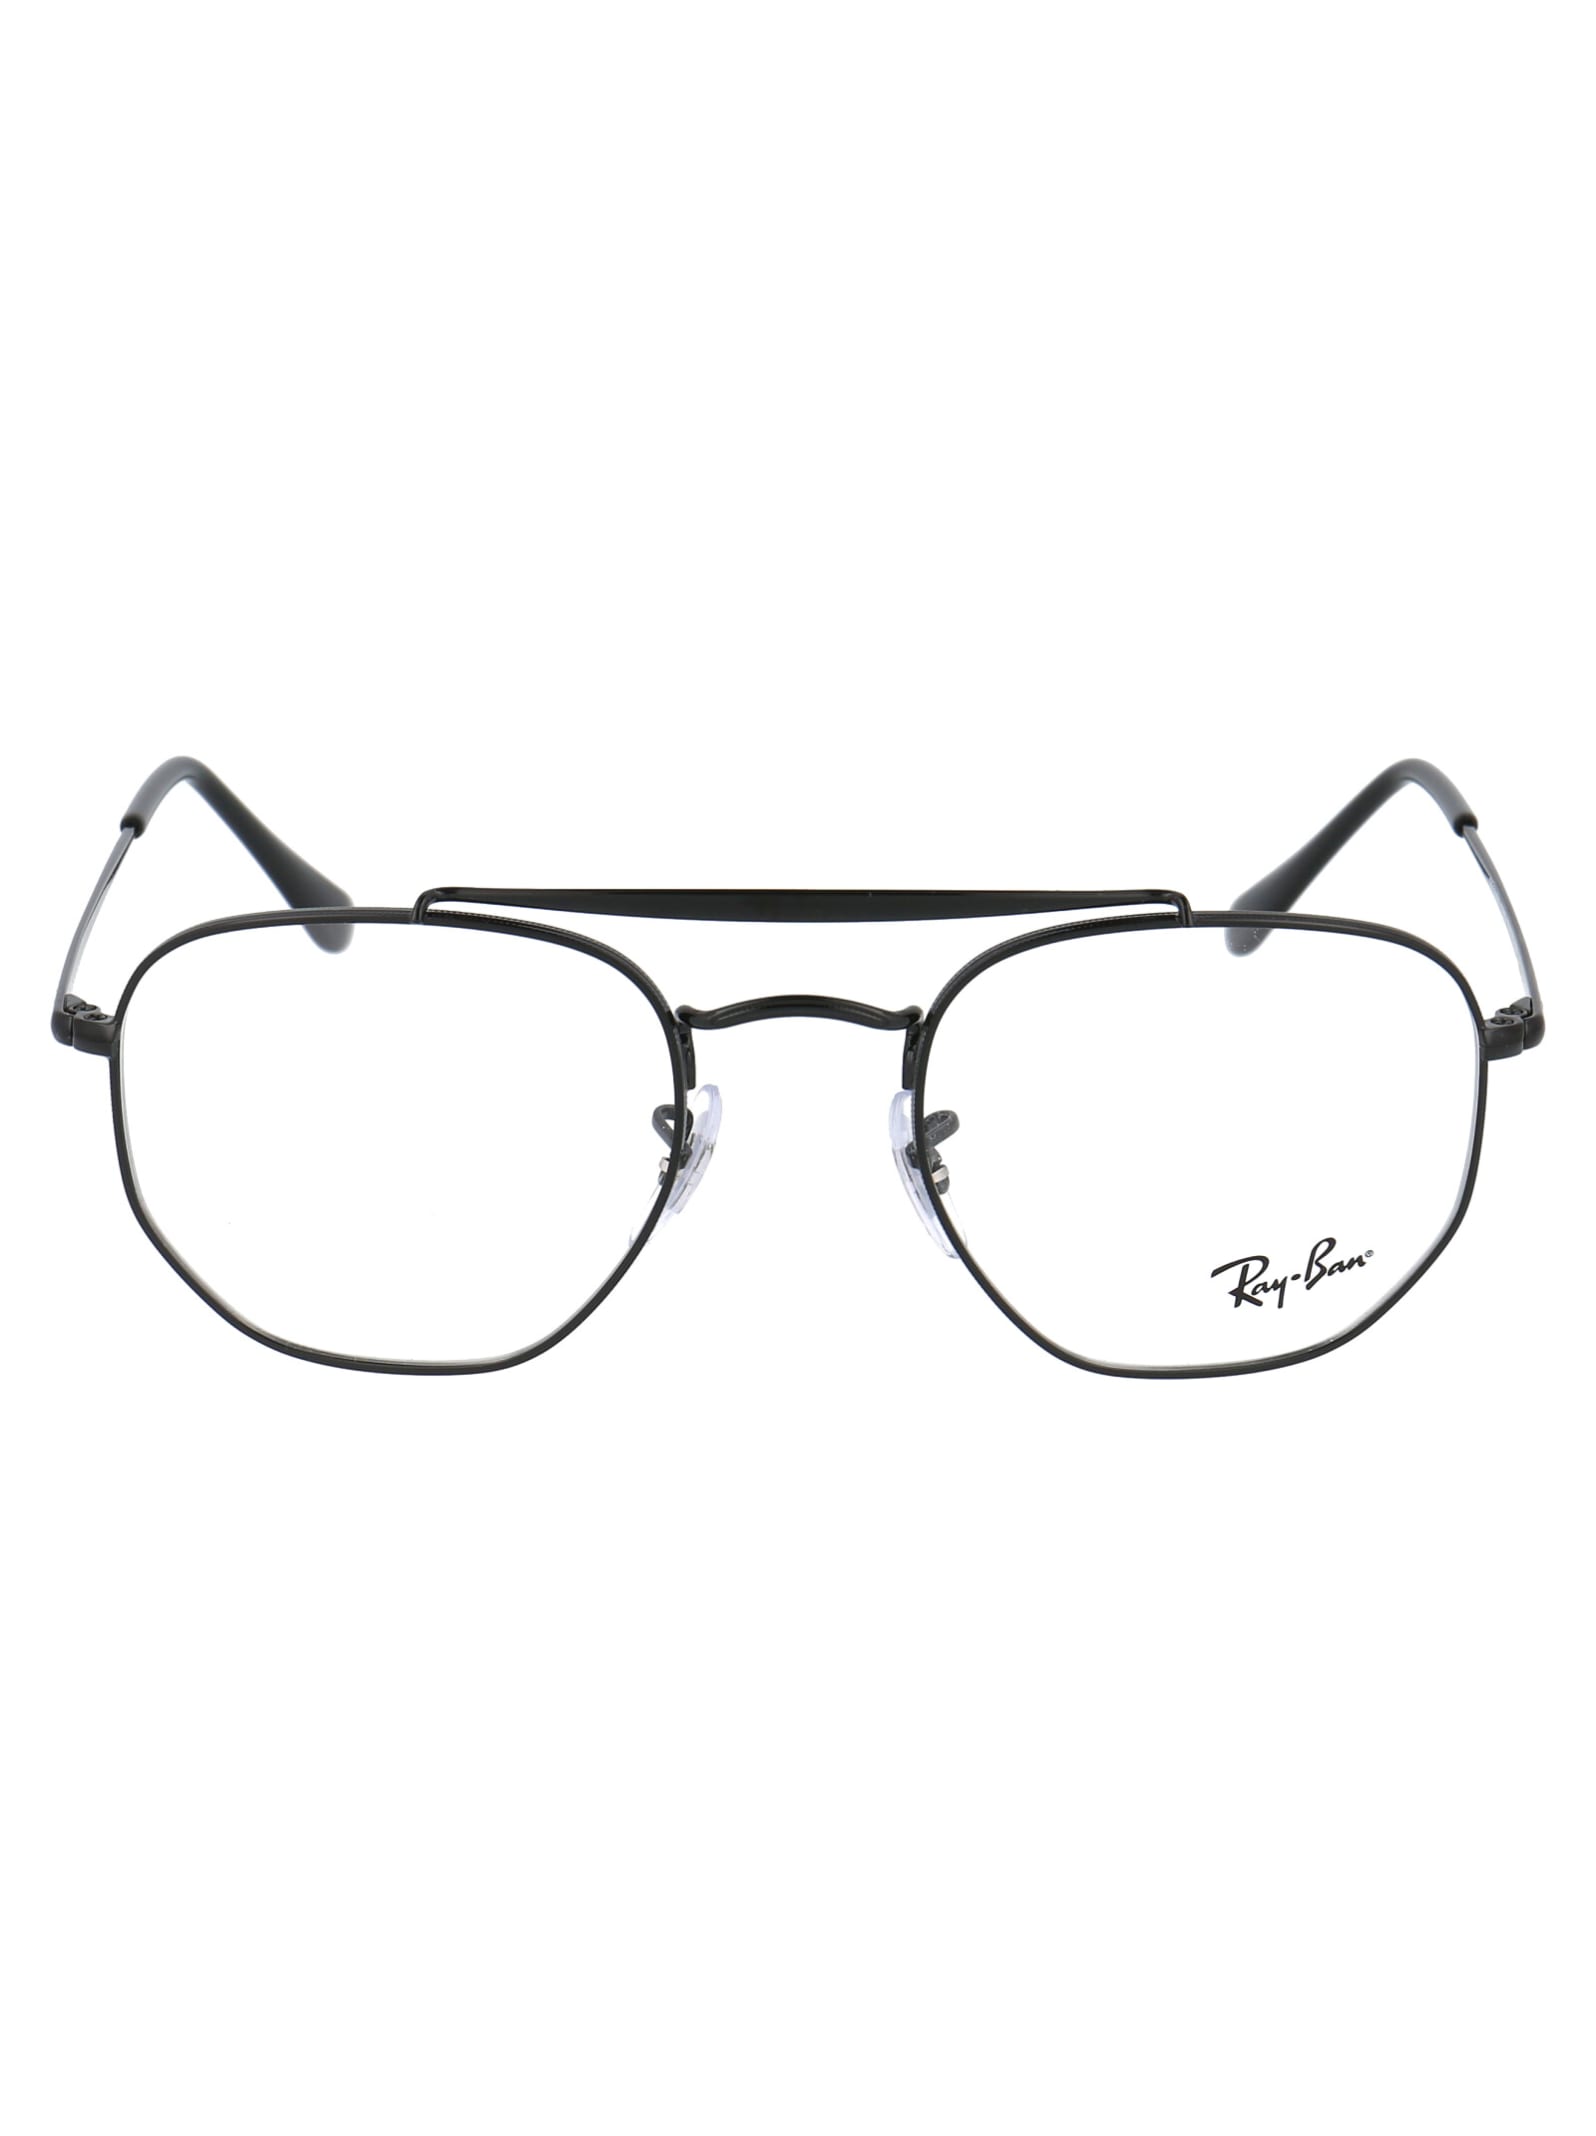 Ray Ban The Marshal Glasses In 2509 Black